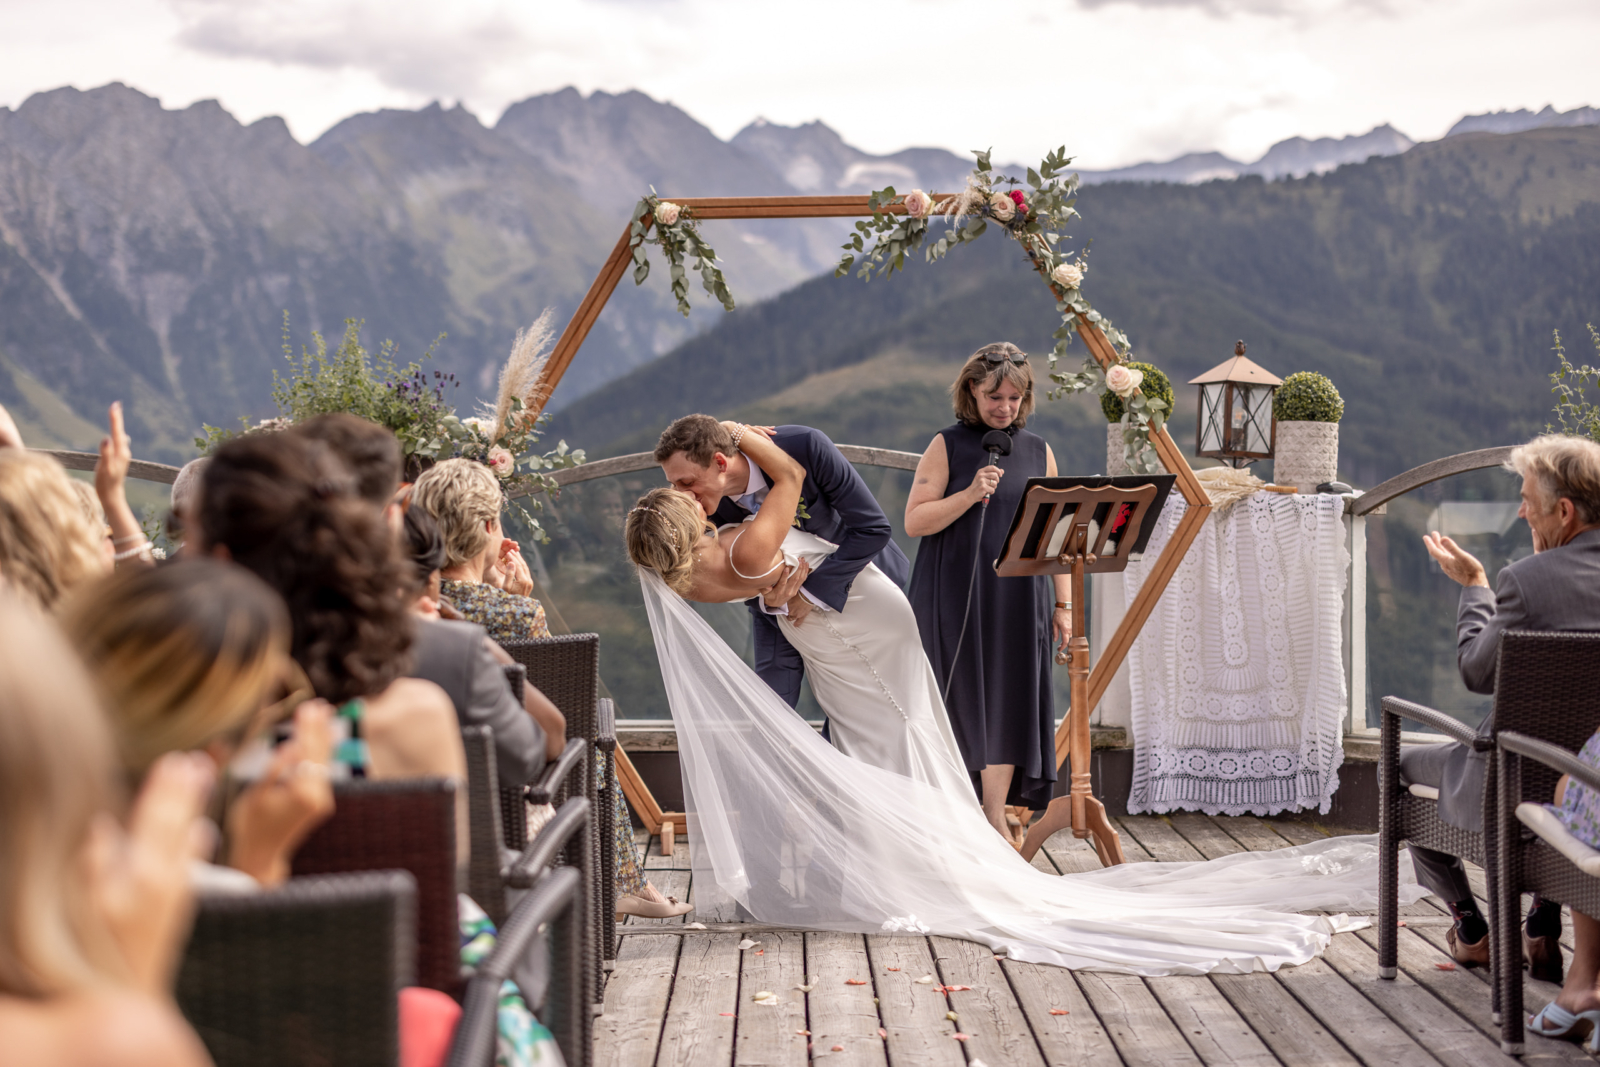 beautiful first kiss at the destination wedding in the mountains in Austria